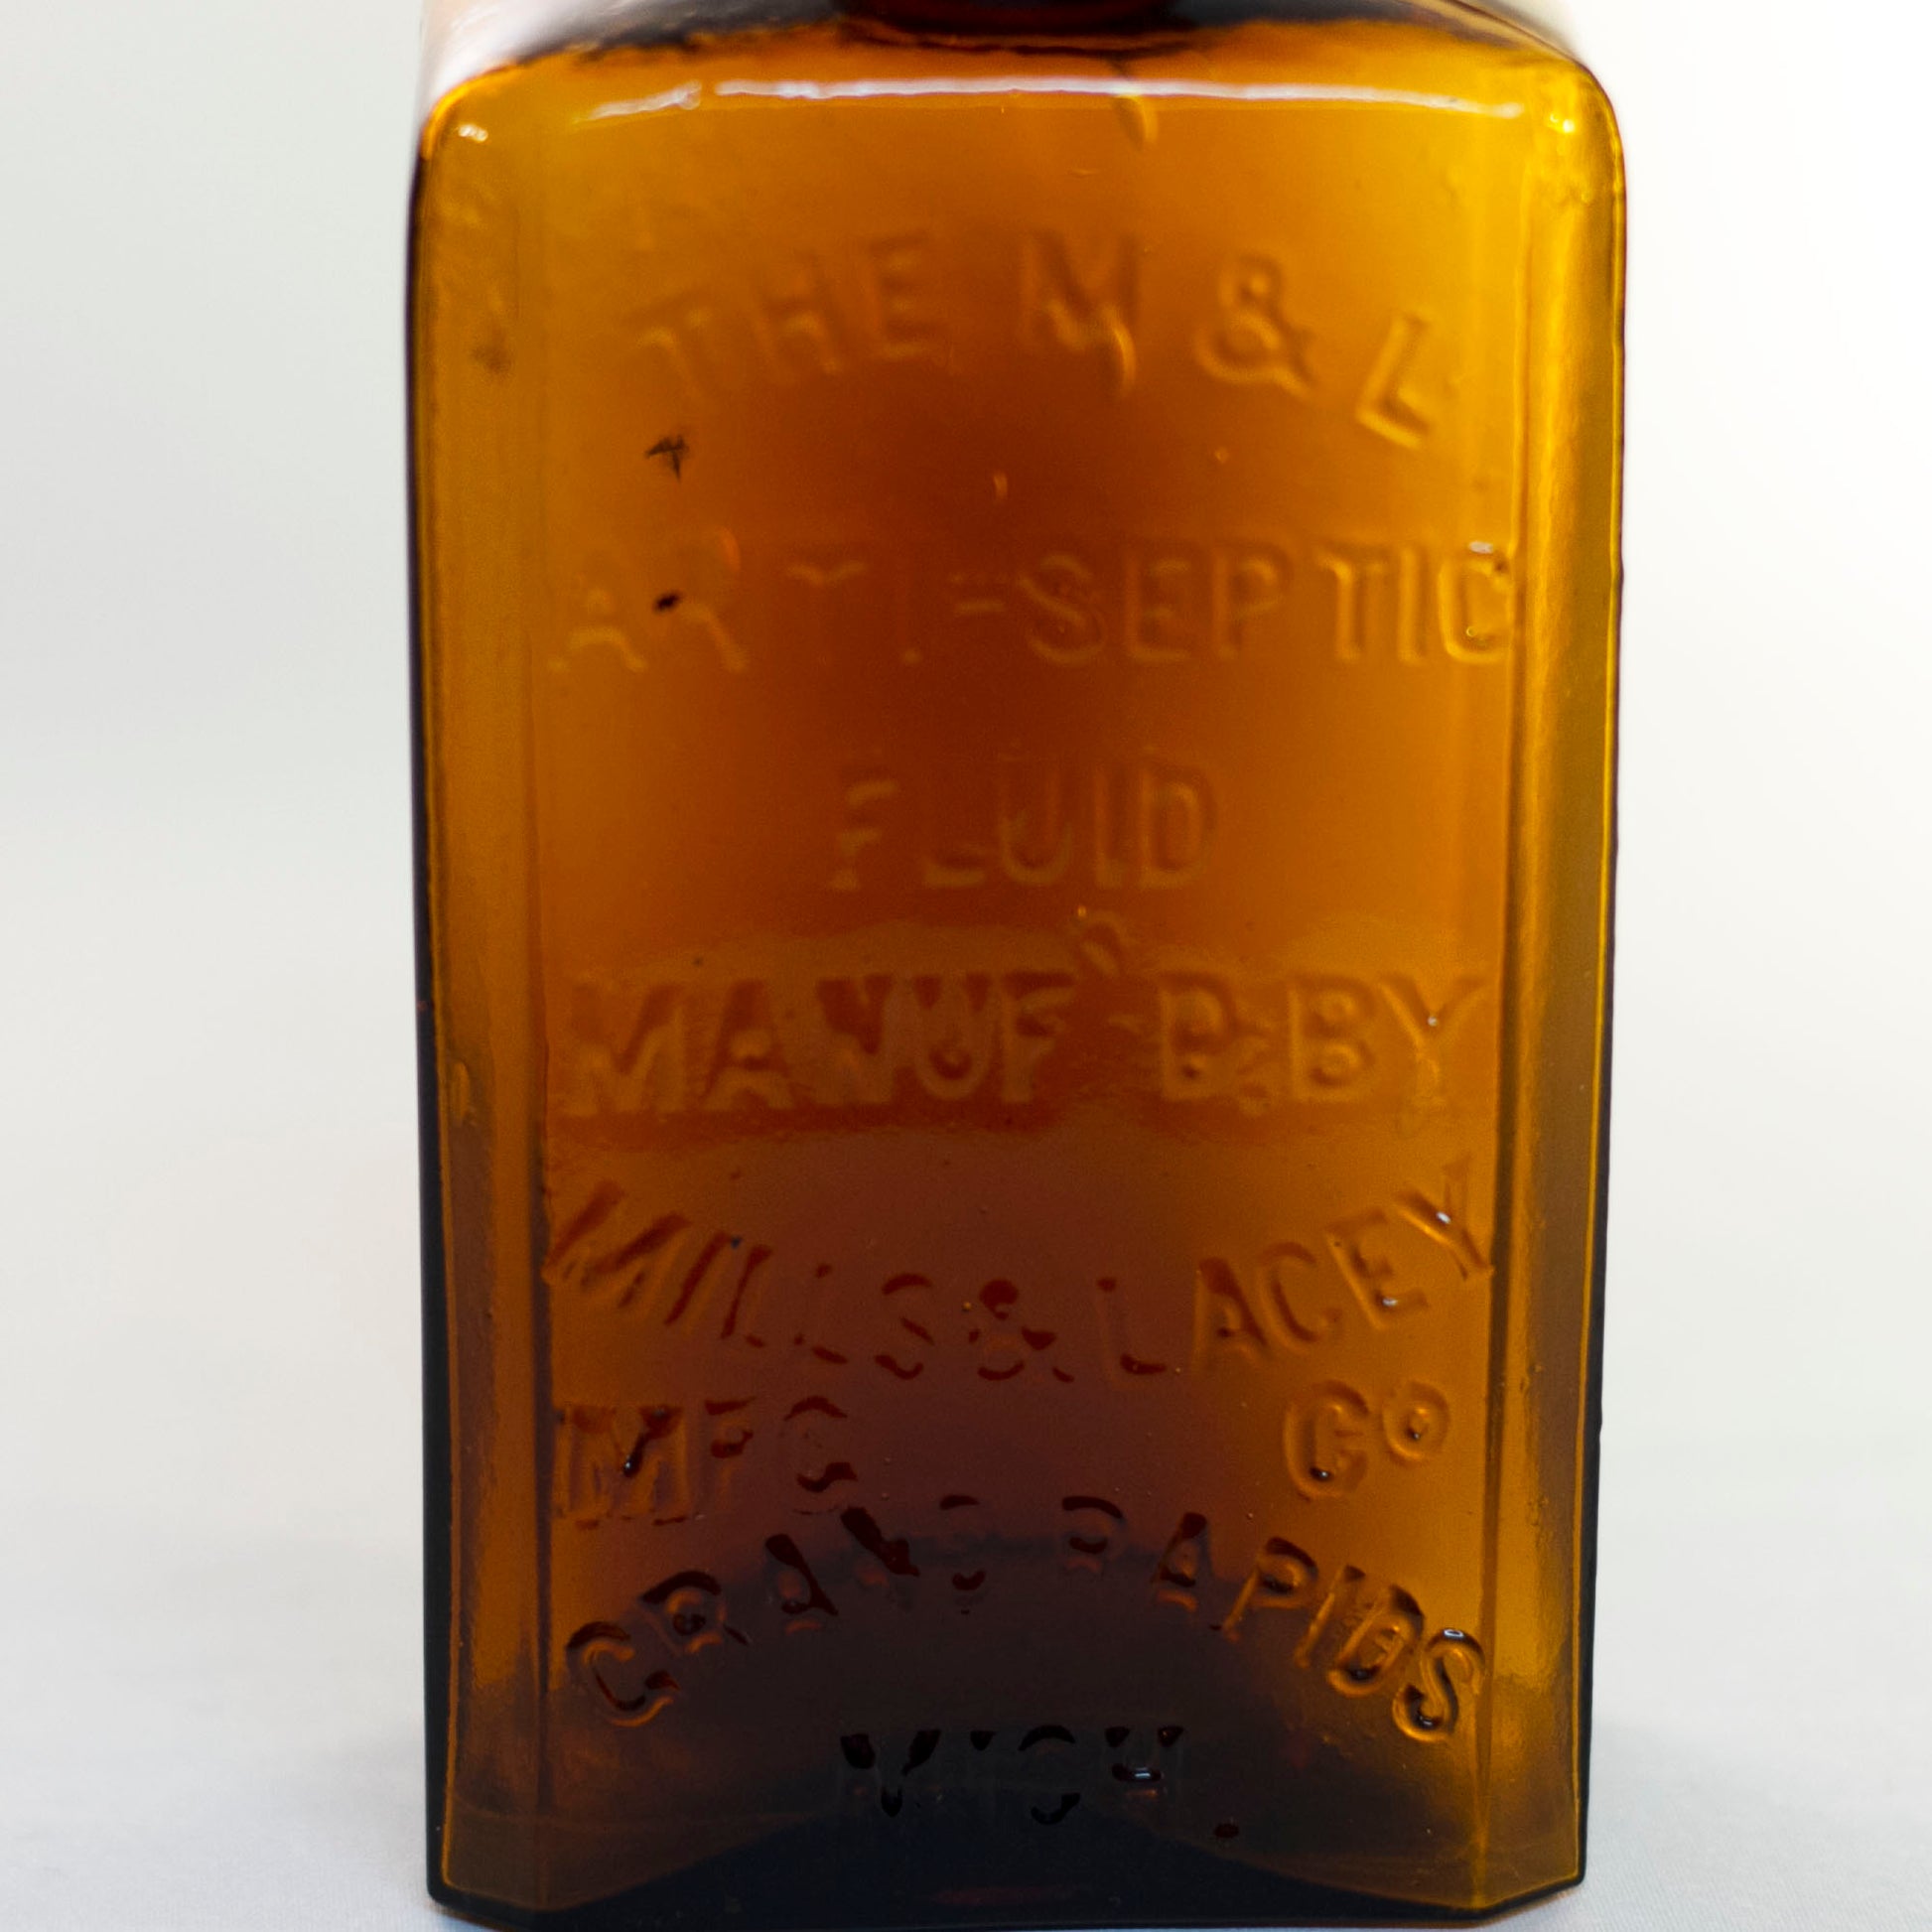 Antique Amber Glass M & L ANTI-SEPTIC Fluid Bottle for Embalming by Mills & Lacey Circa 1880s